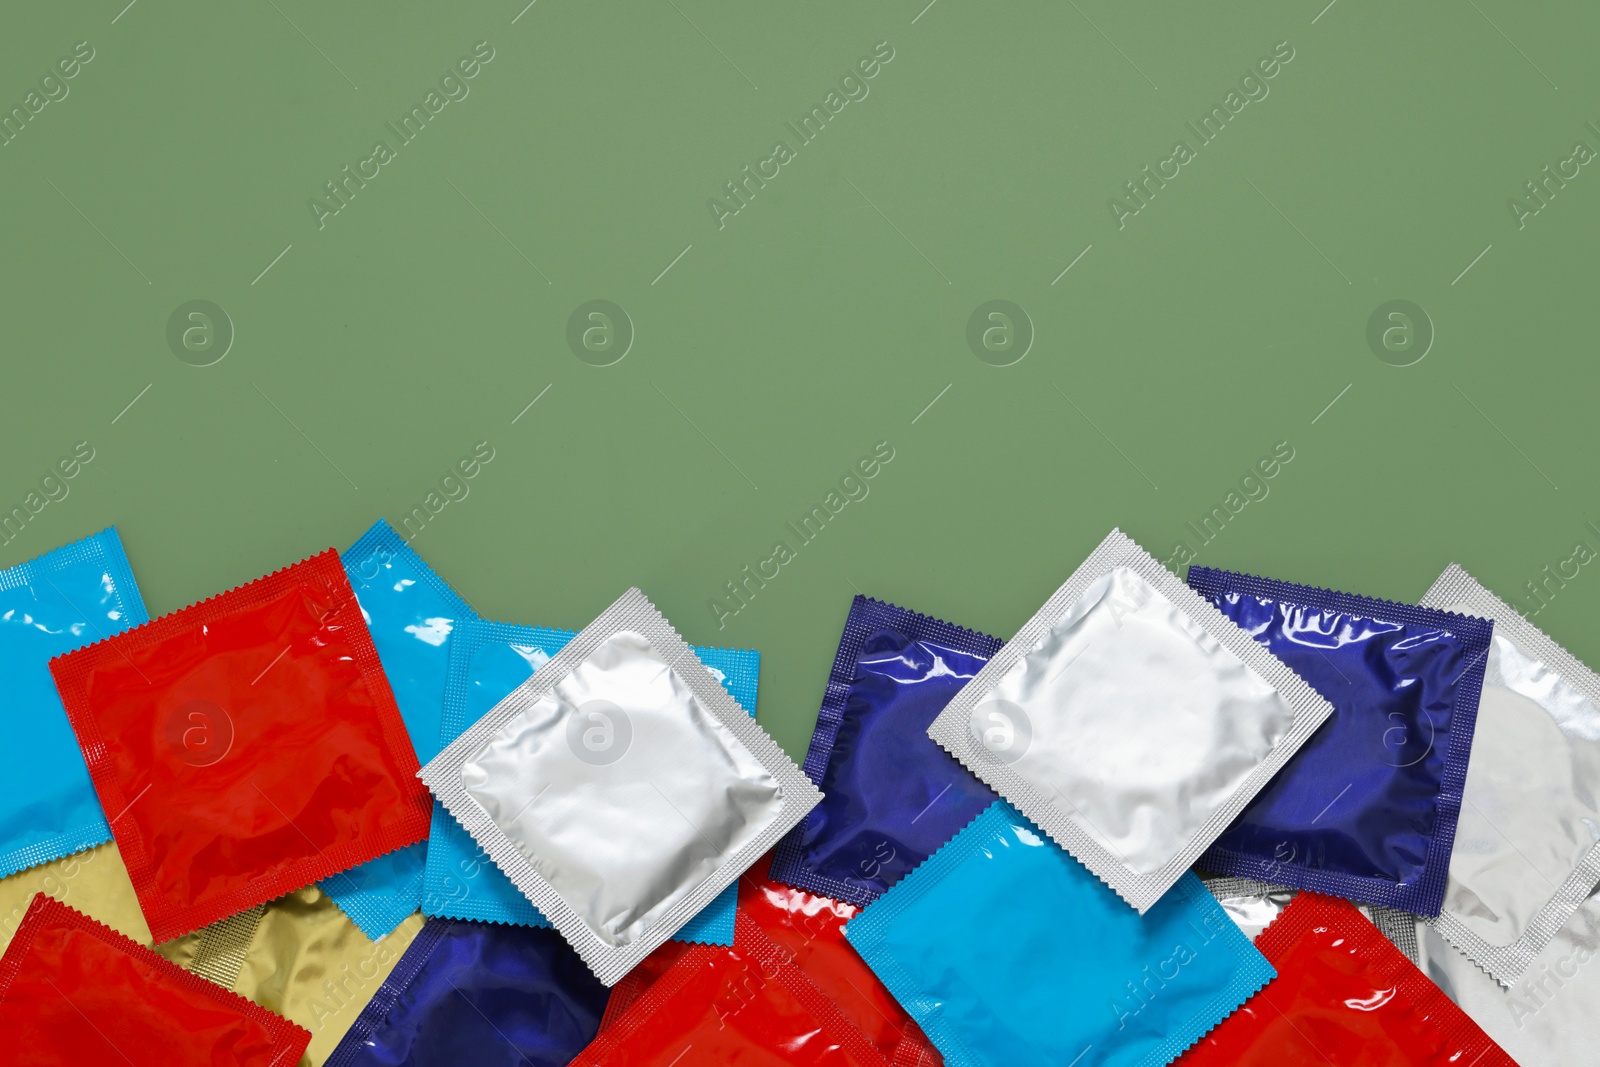 Photo of Packaged condoms on light green background, top view with space for text. Safe sex